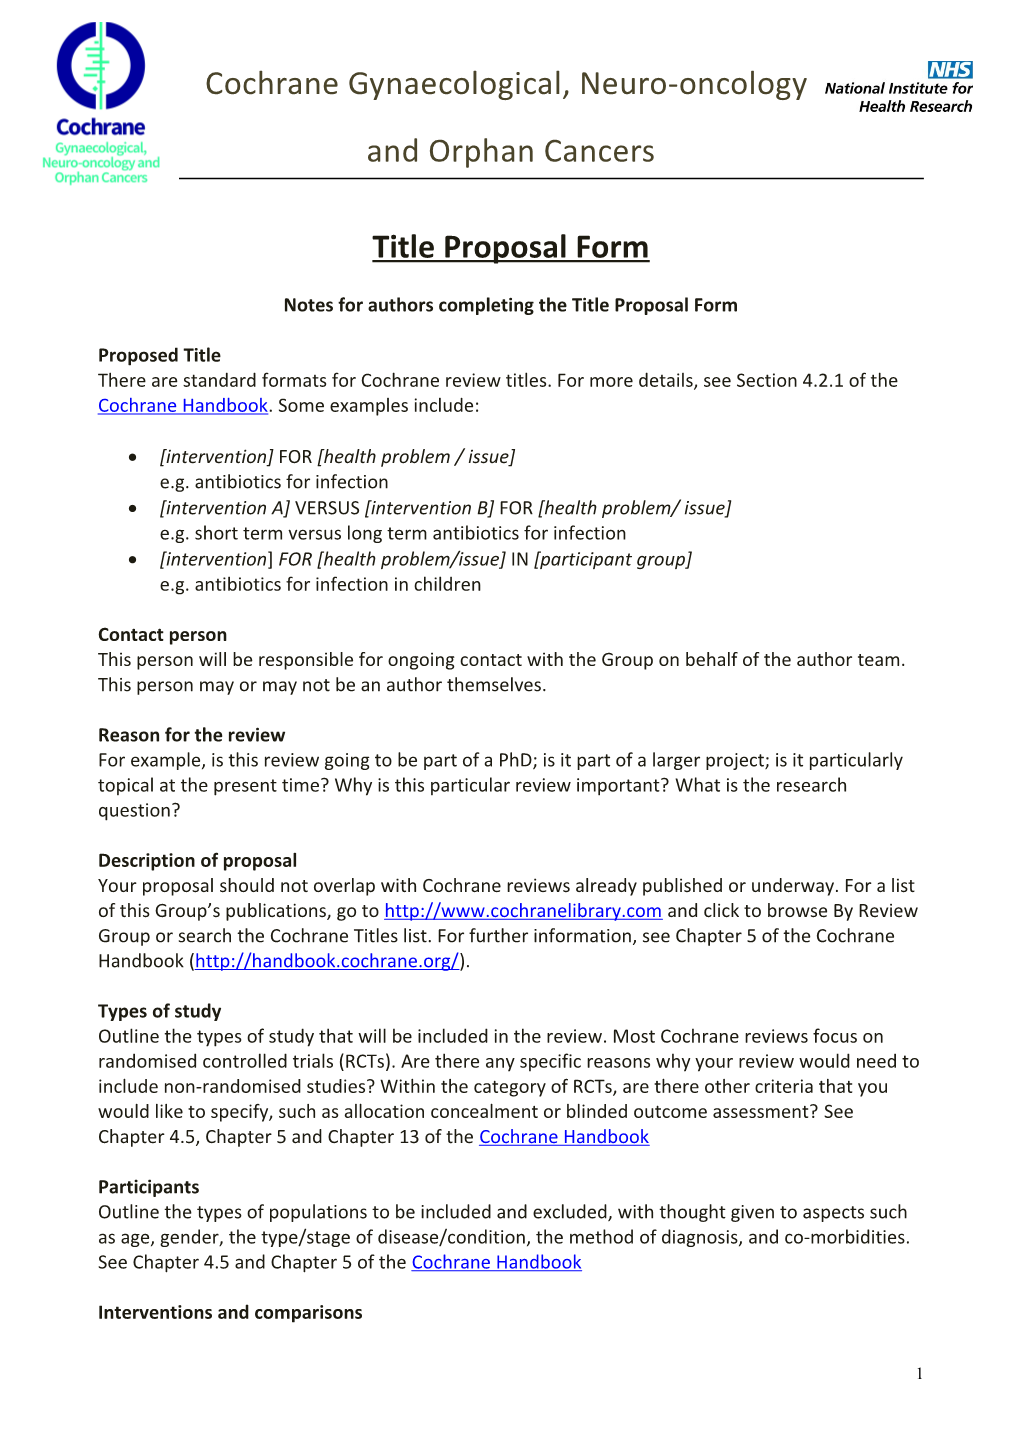 Notes for Authors Completing the Title Proposal Form